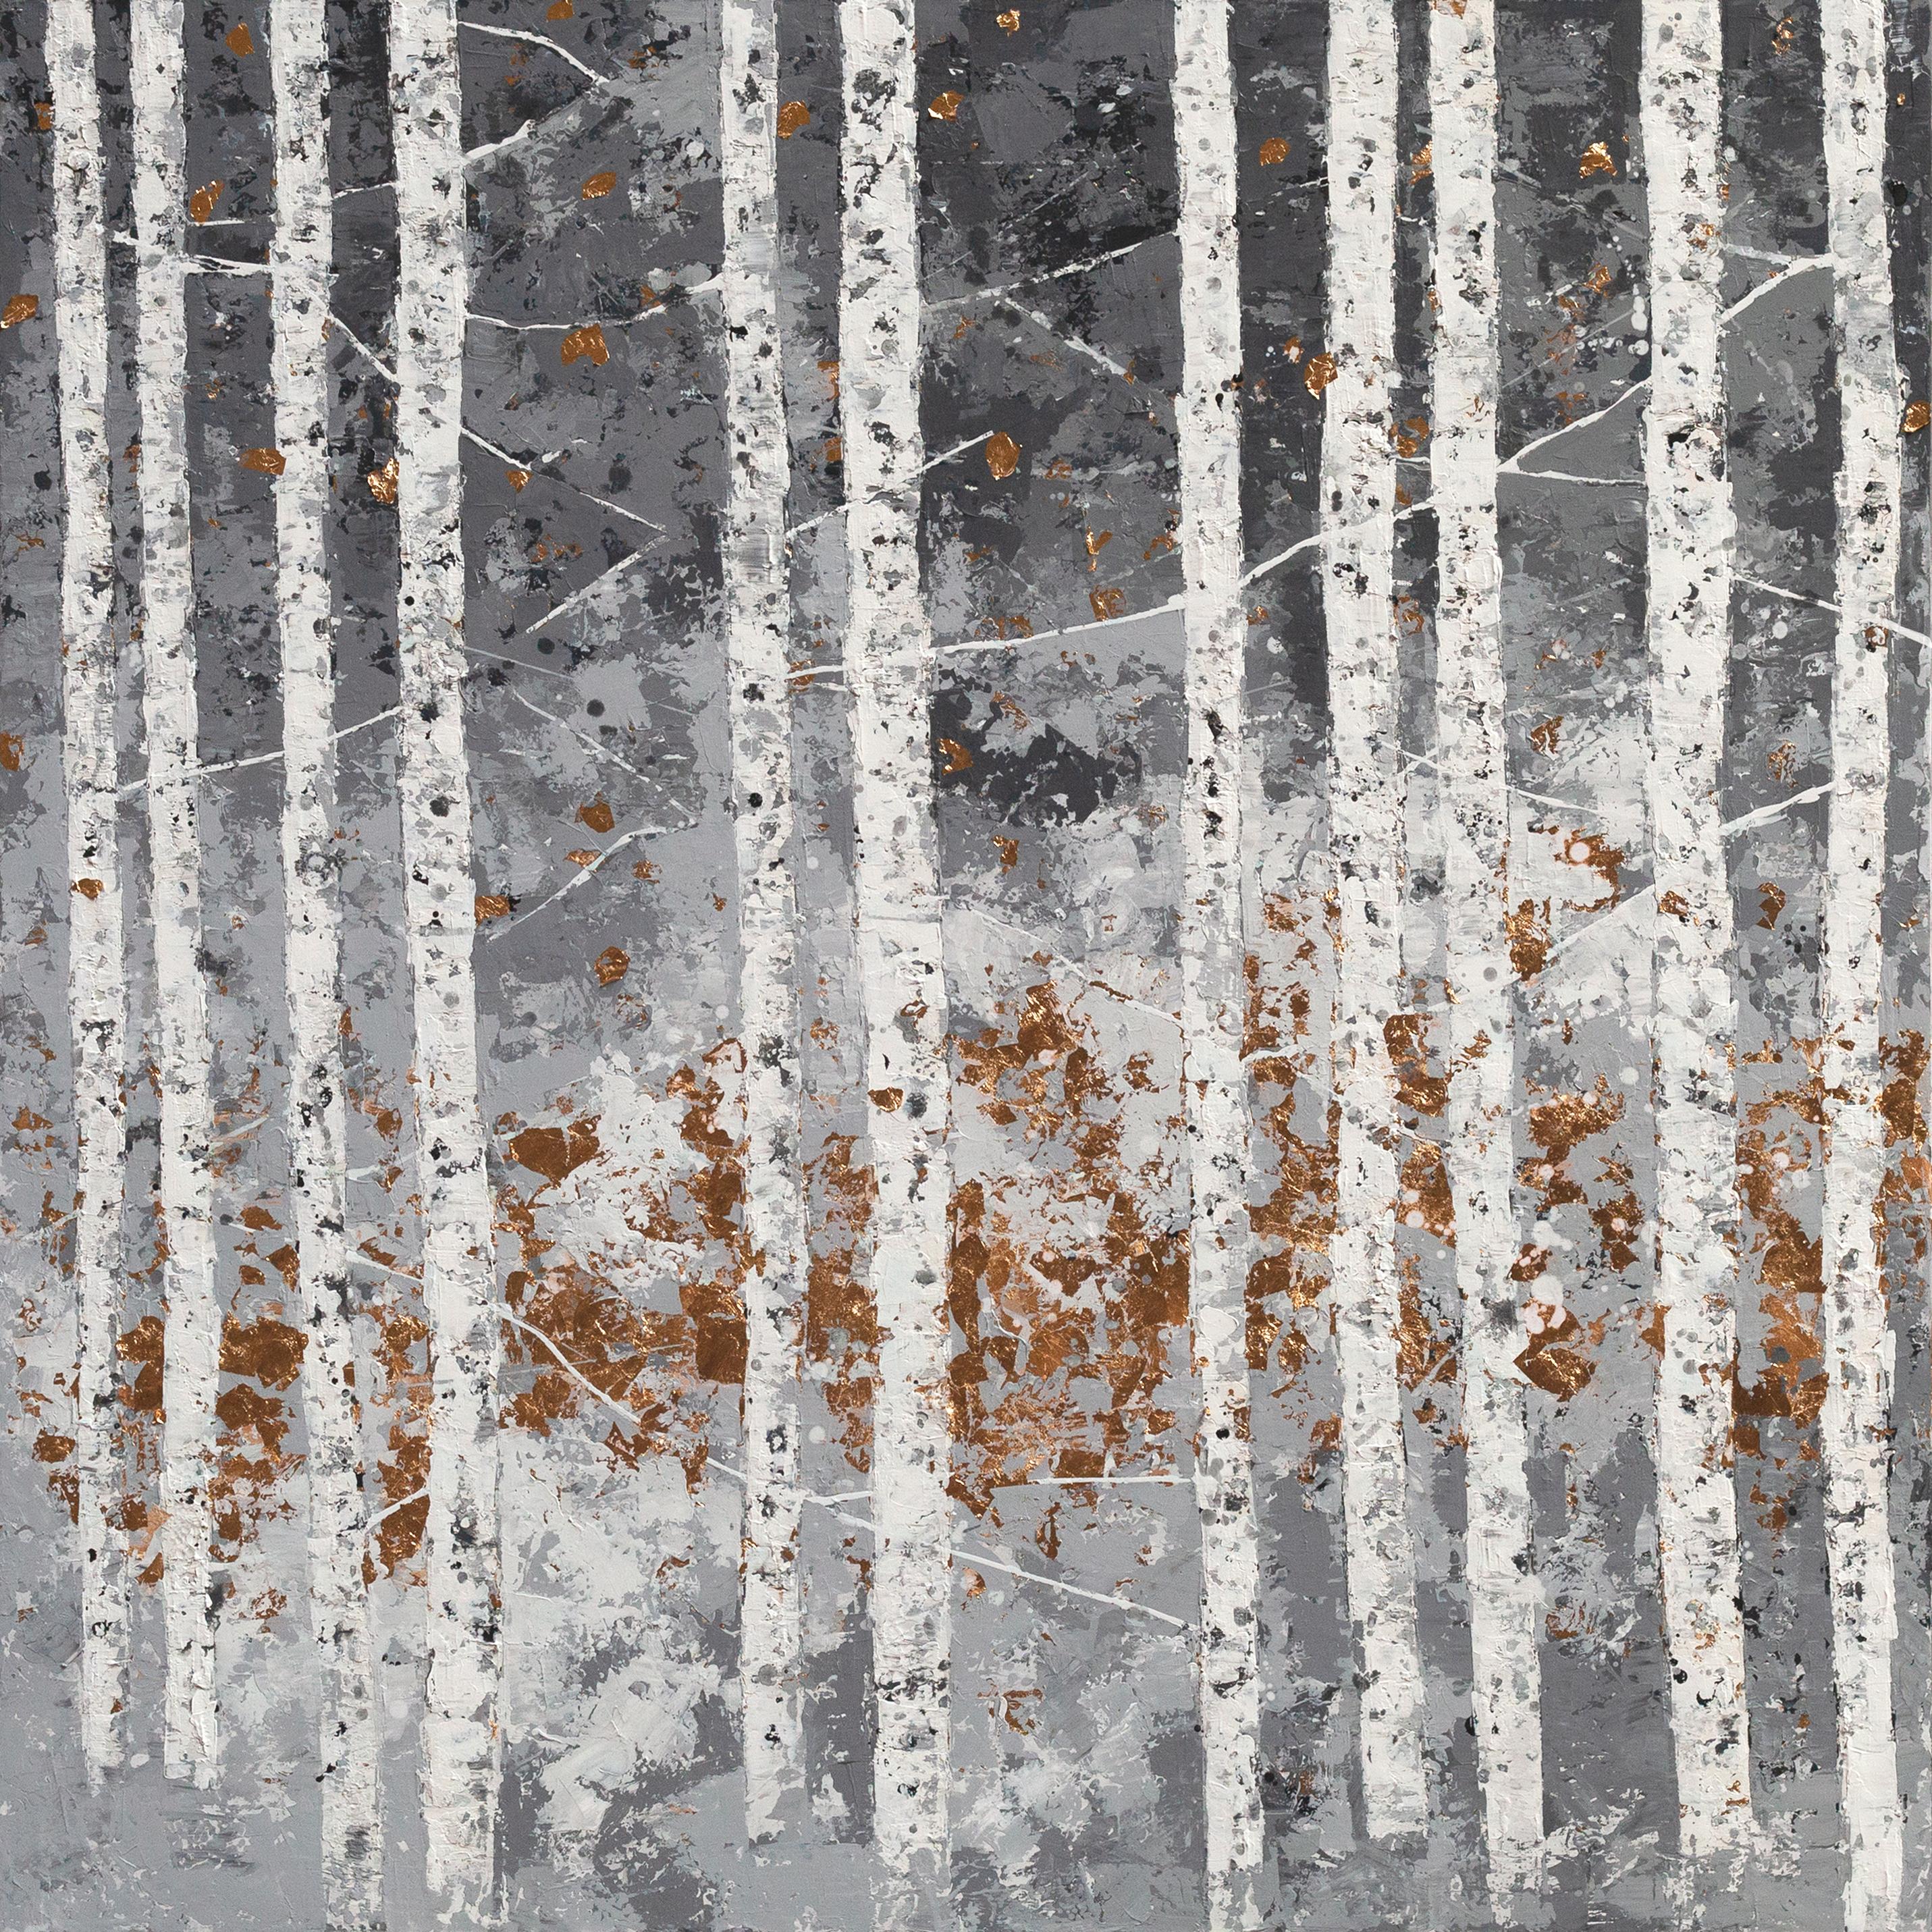 El Bosque Nevado - 21st Century, Contemporary, Abstract Painting, Gold, Forest